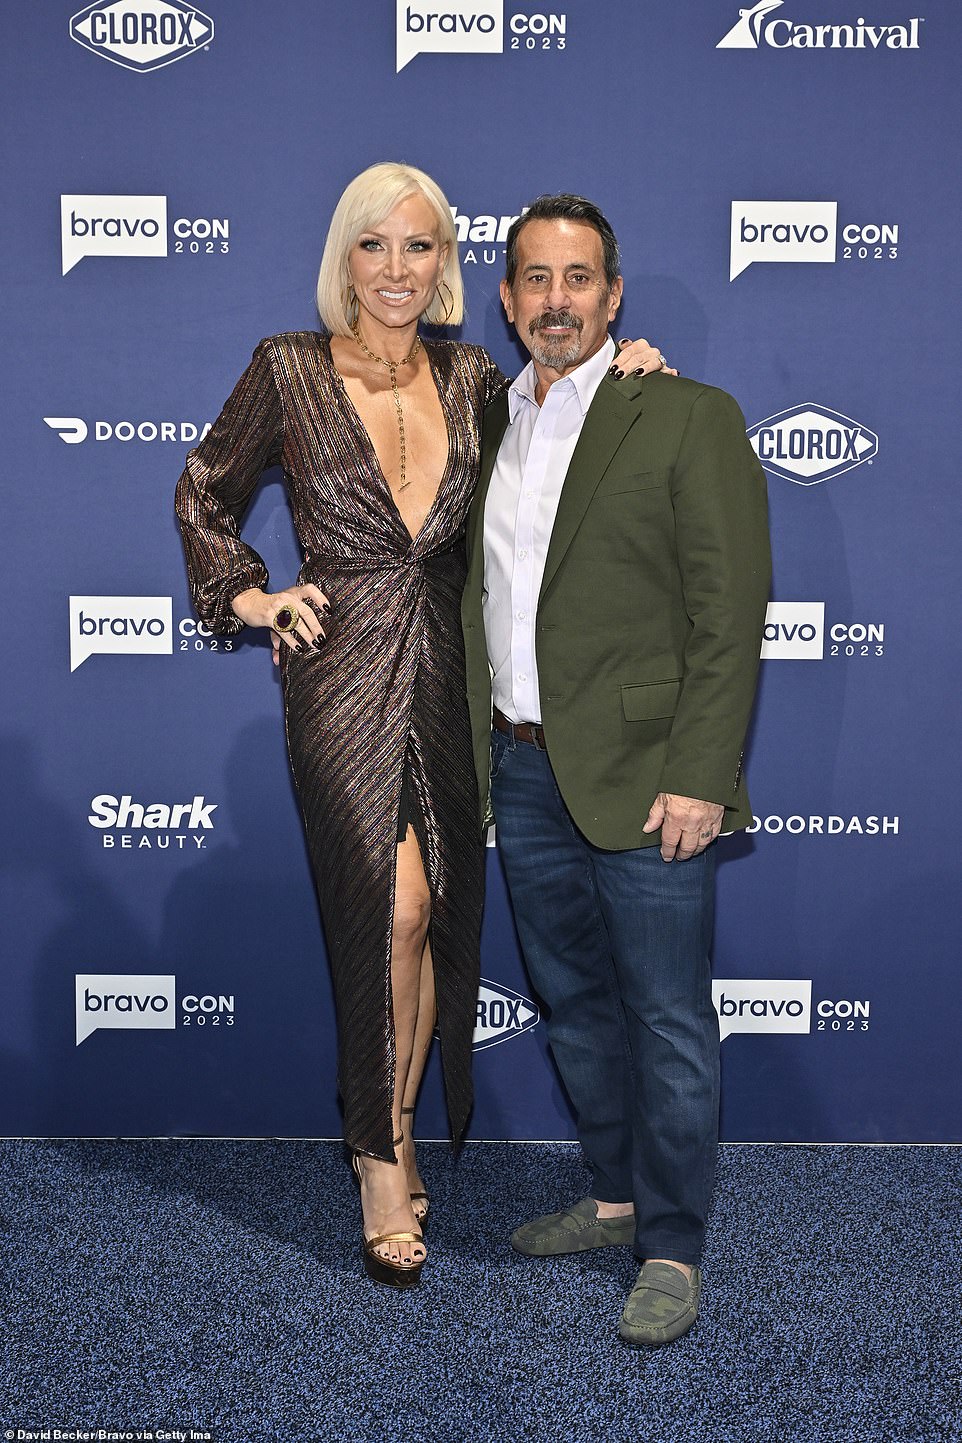 Cute pair: Margaret Josephs, 56, wore a plunging metallic gown for the occasion, as she posed with husband Joe Benigno